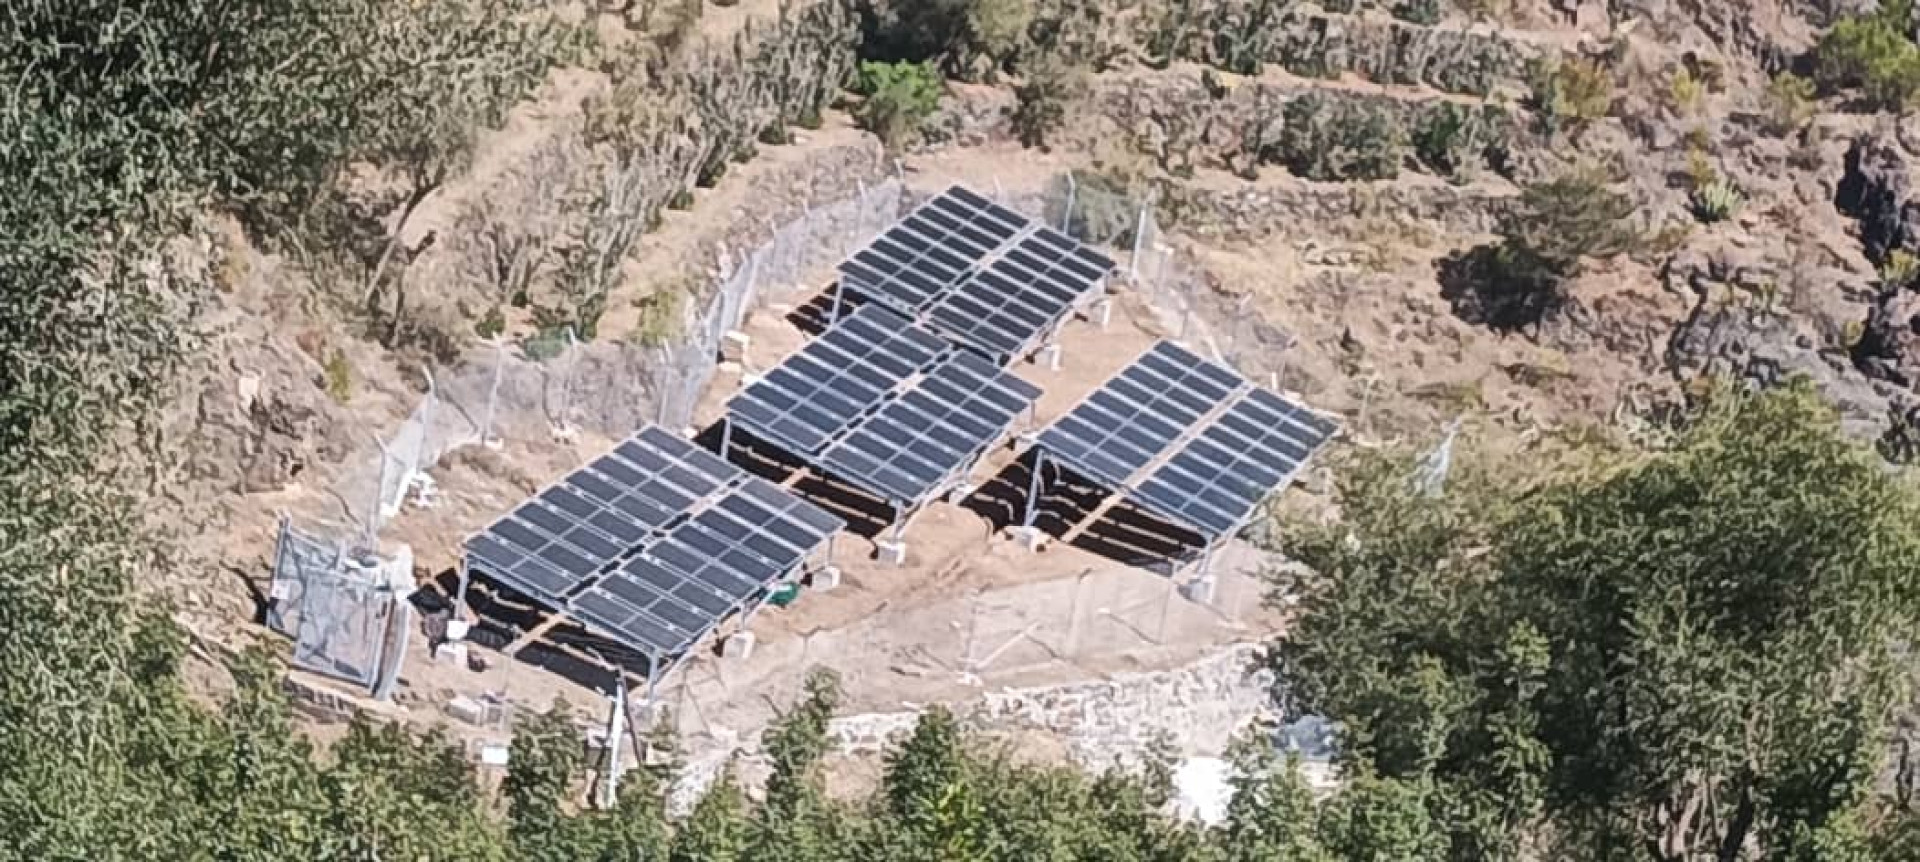 Supply, Installation, Testing, and Commissioning of solar pumping system with a capacity of 35.2 kw to Al-Mahrabah Well, Taiz Governorate(Well Code: TAZ-C)